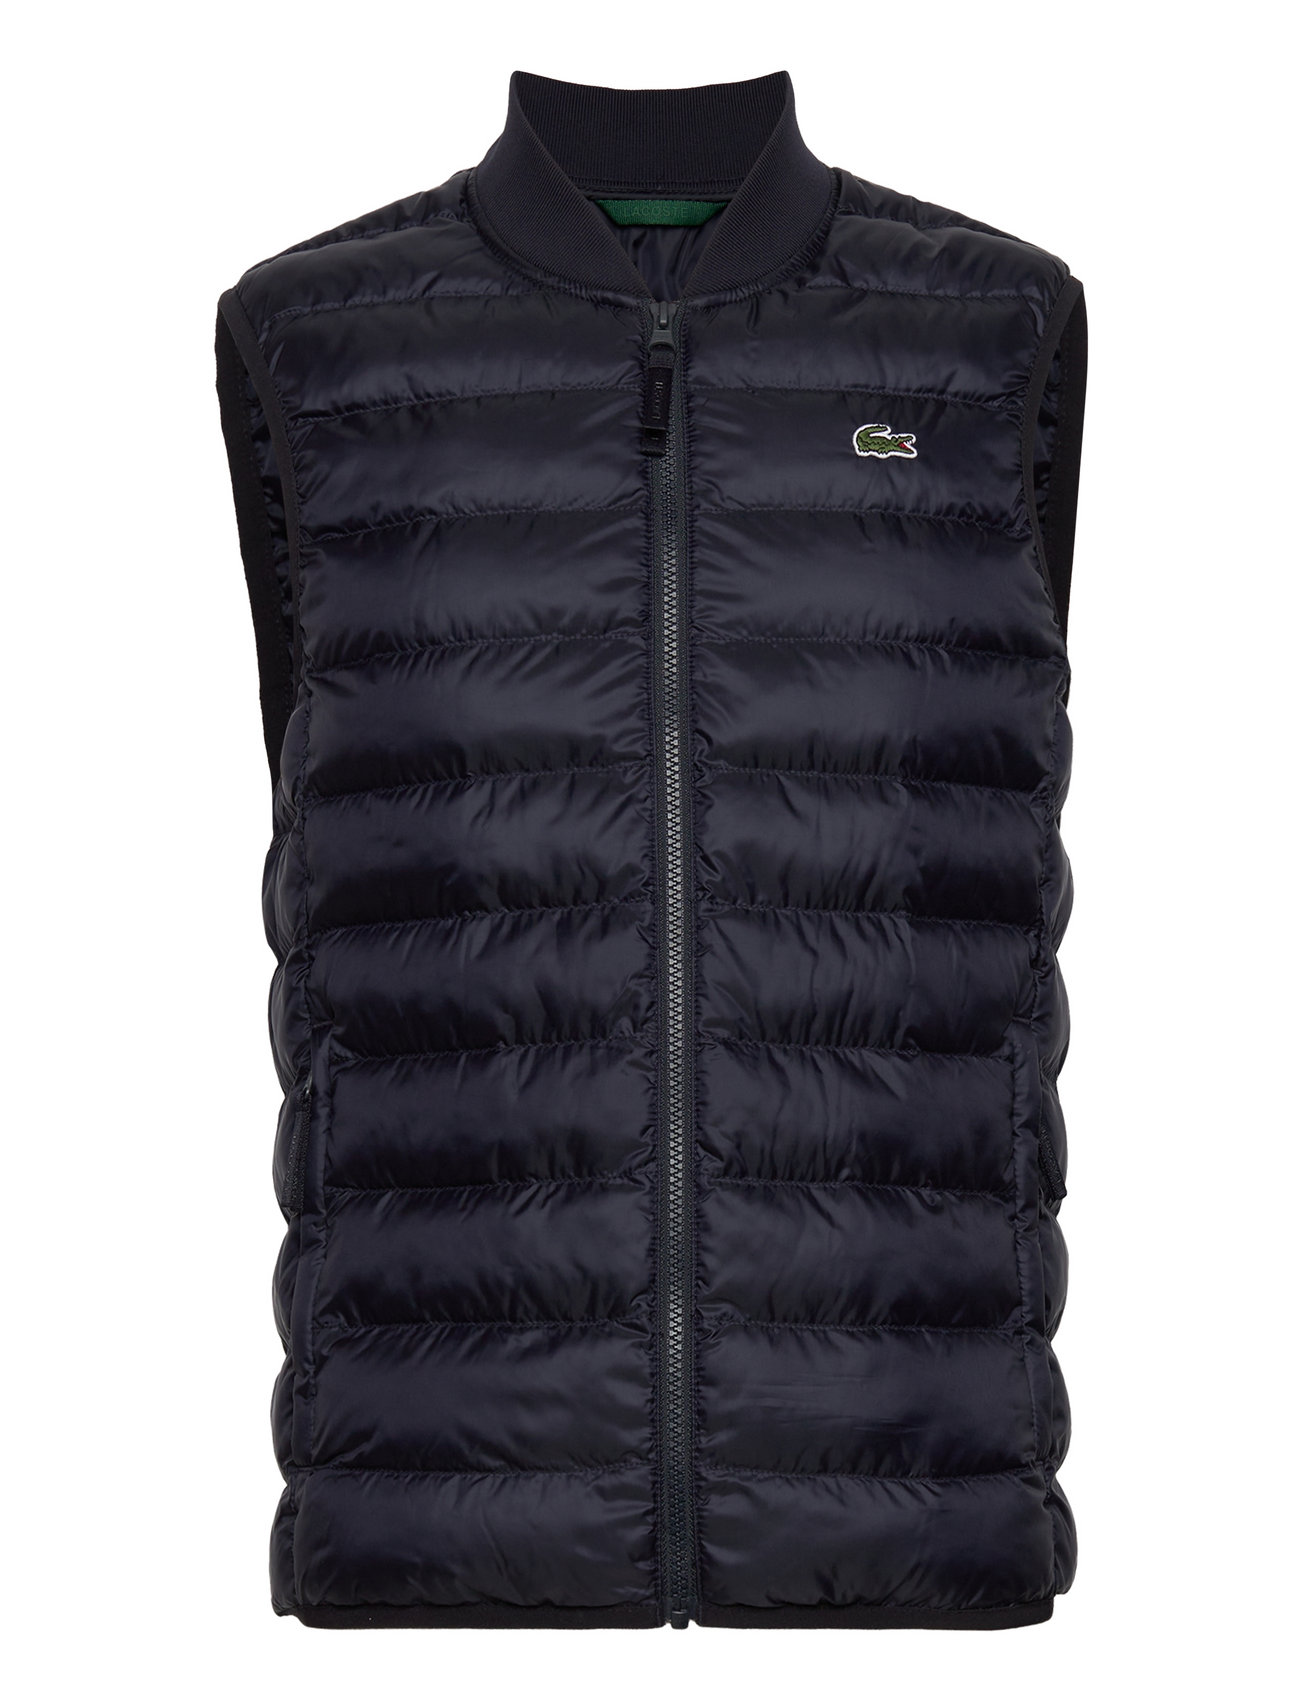 Lacoste Parkas & Blousons - 200 €. Buy Vests from online at Boozt.com. Fast delivery and easy returns